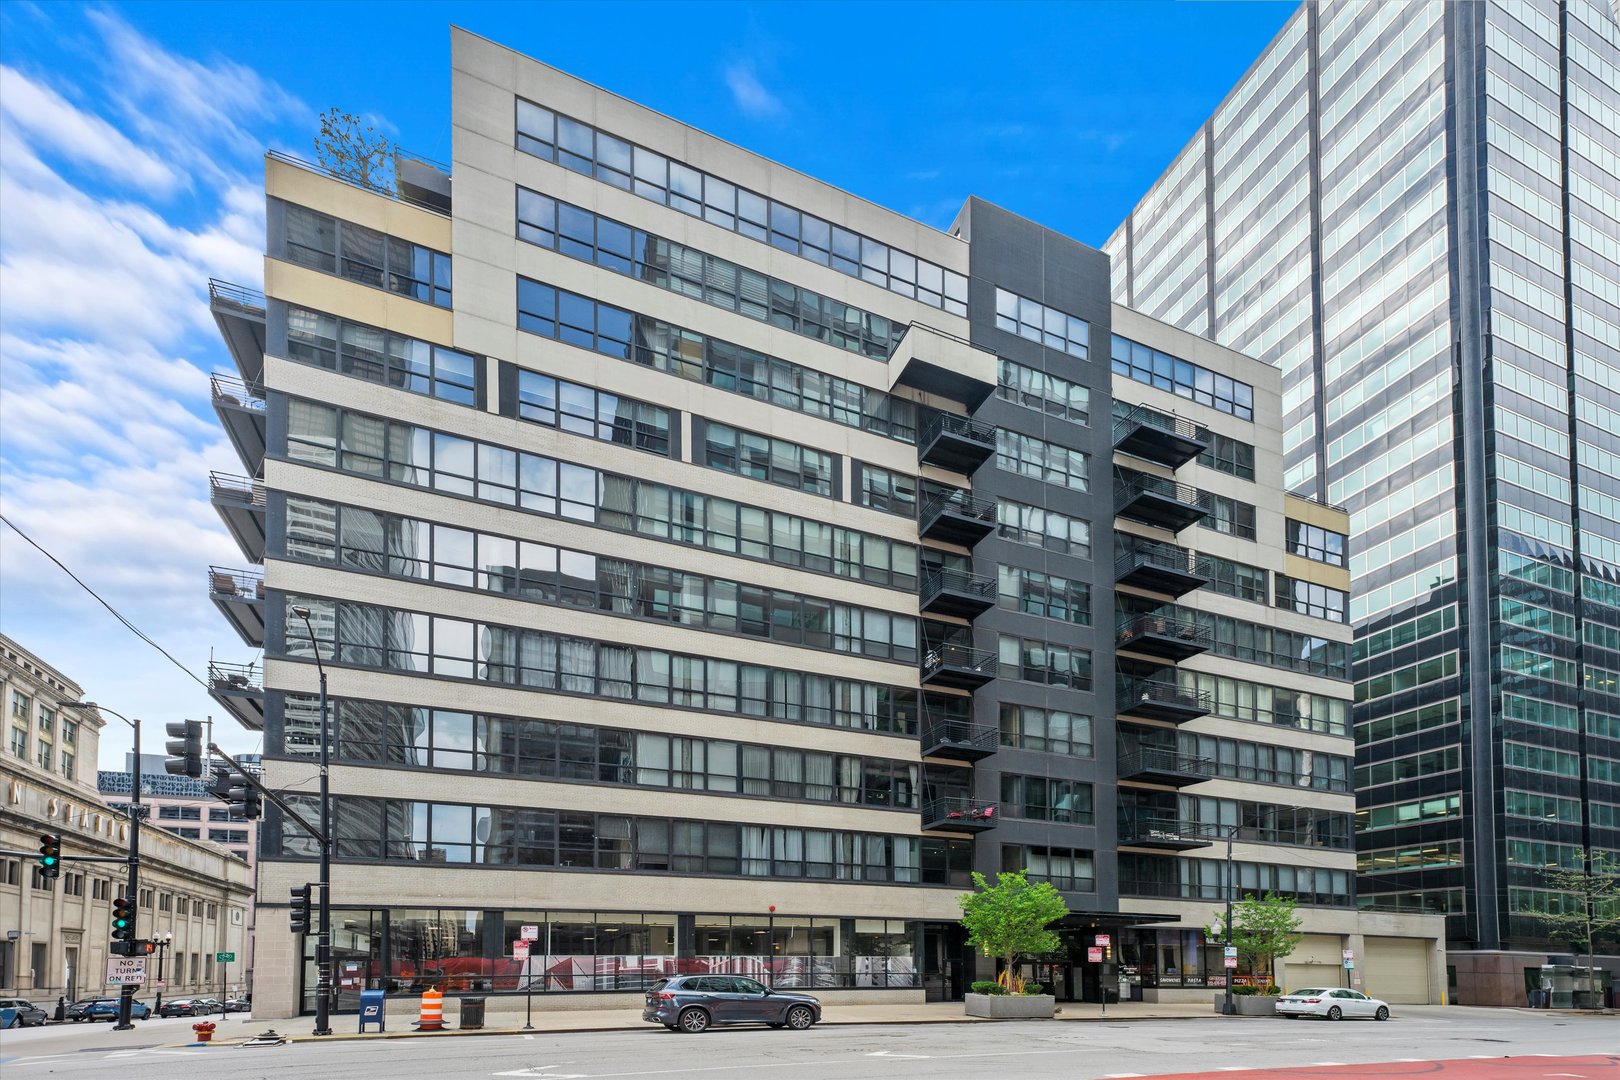 130 S Canal Street, Unit 9r, Chicago, Il 60606